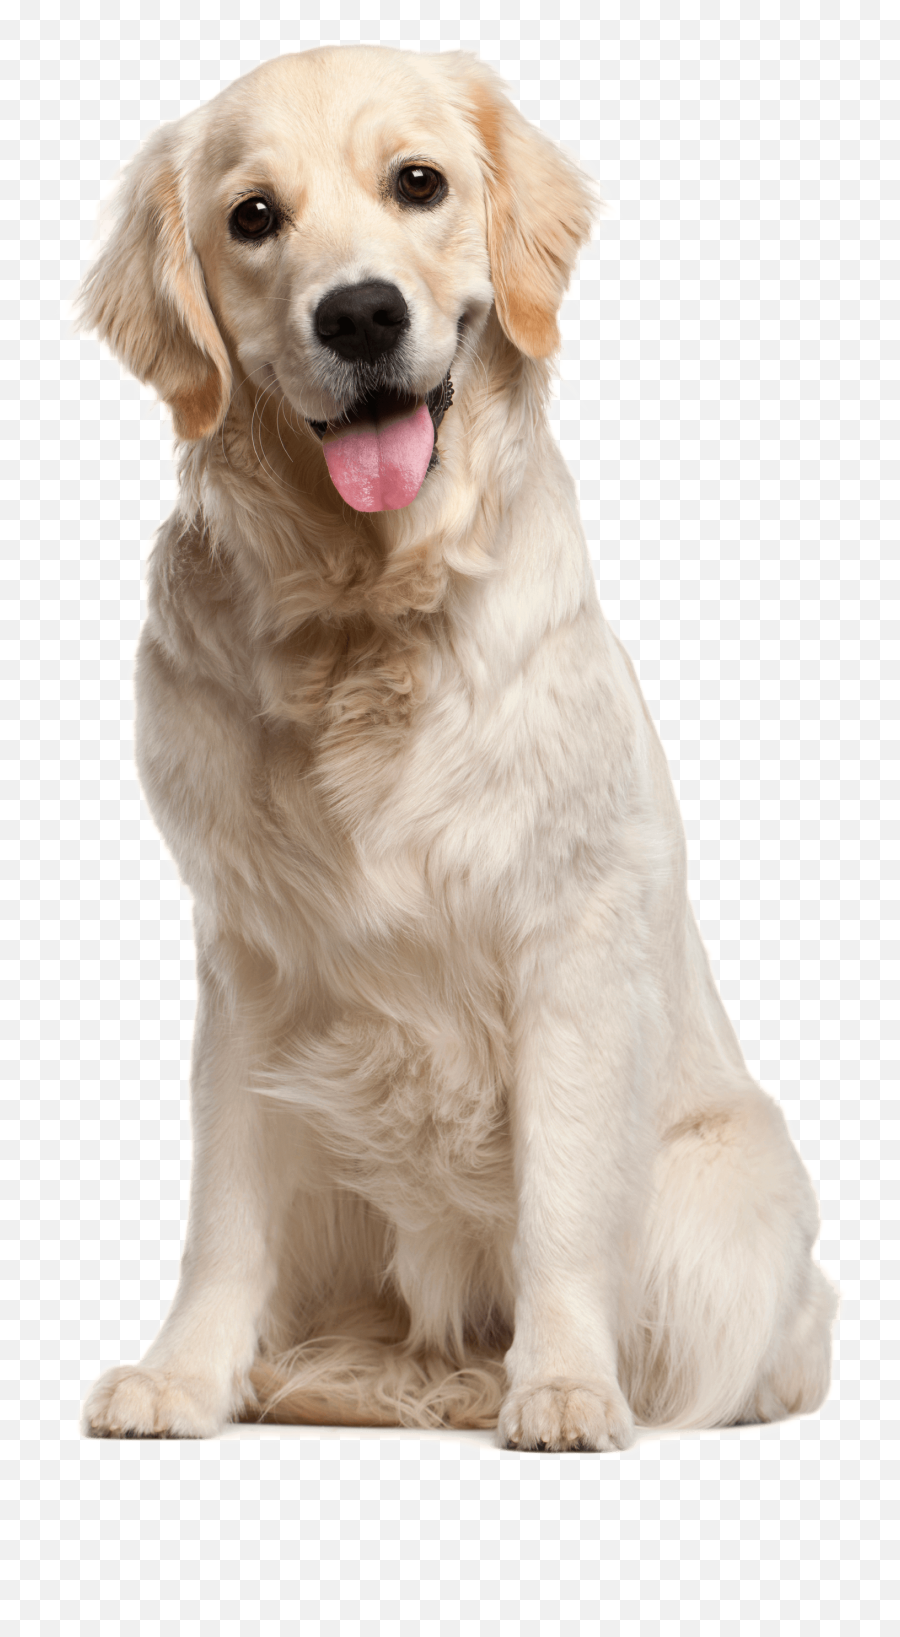 Dog Anxiety A Full Guide And Recommended Dog Anxiety - Dog Png Emoji,Dogs Emotions